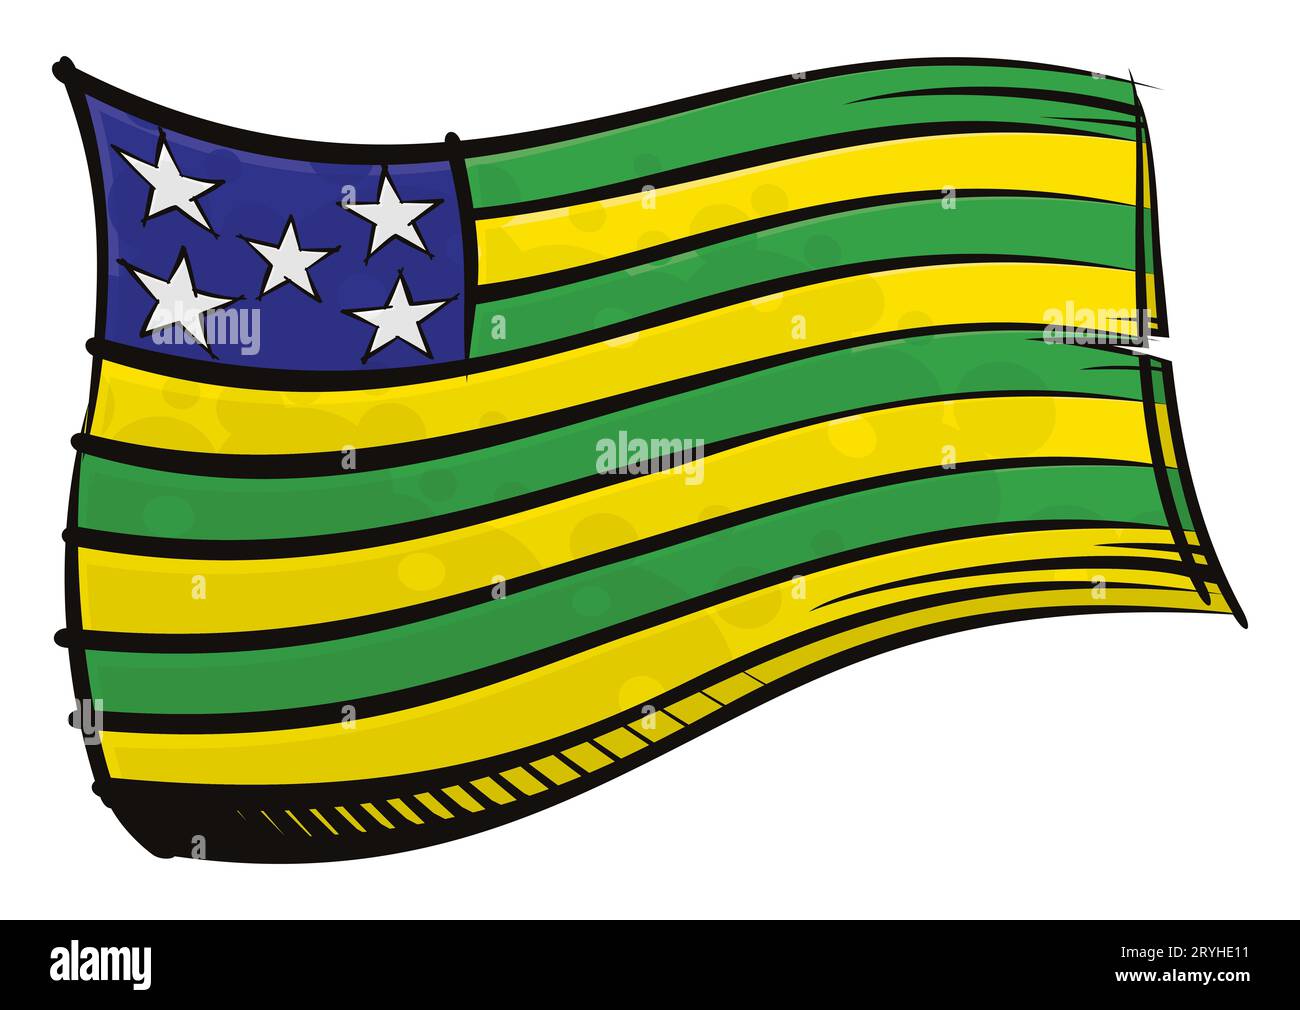 Brazilian state Goias national flag created in graffiti paint style Stock Photo